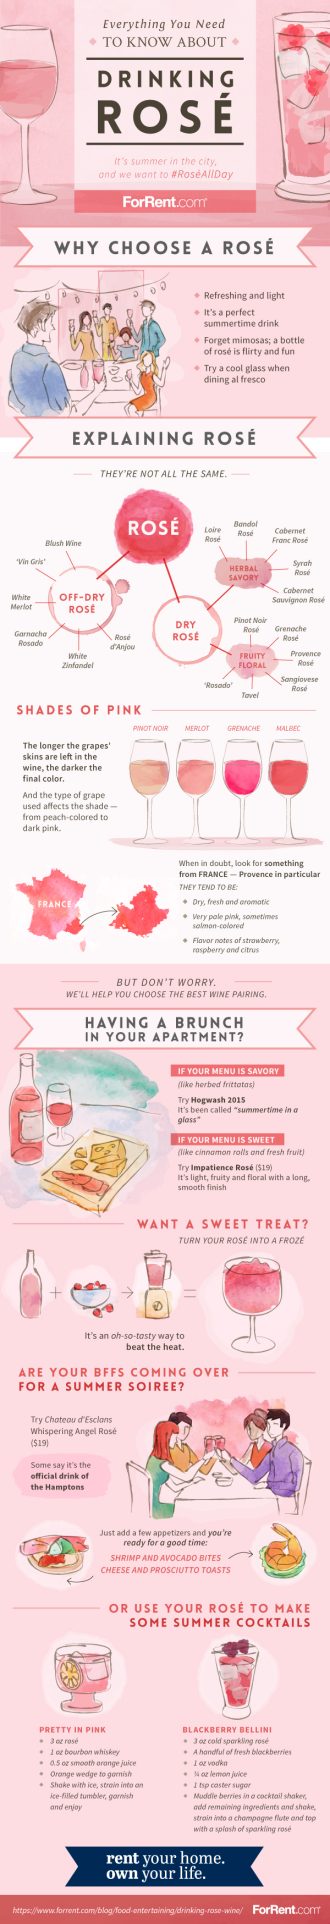 Everything You Need to Know About Drinking Rosé